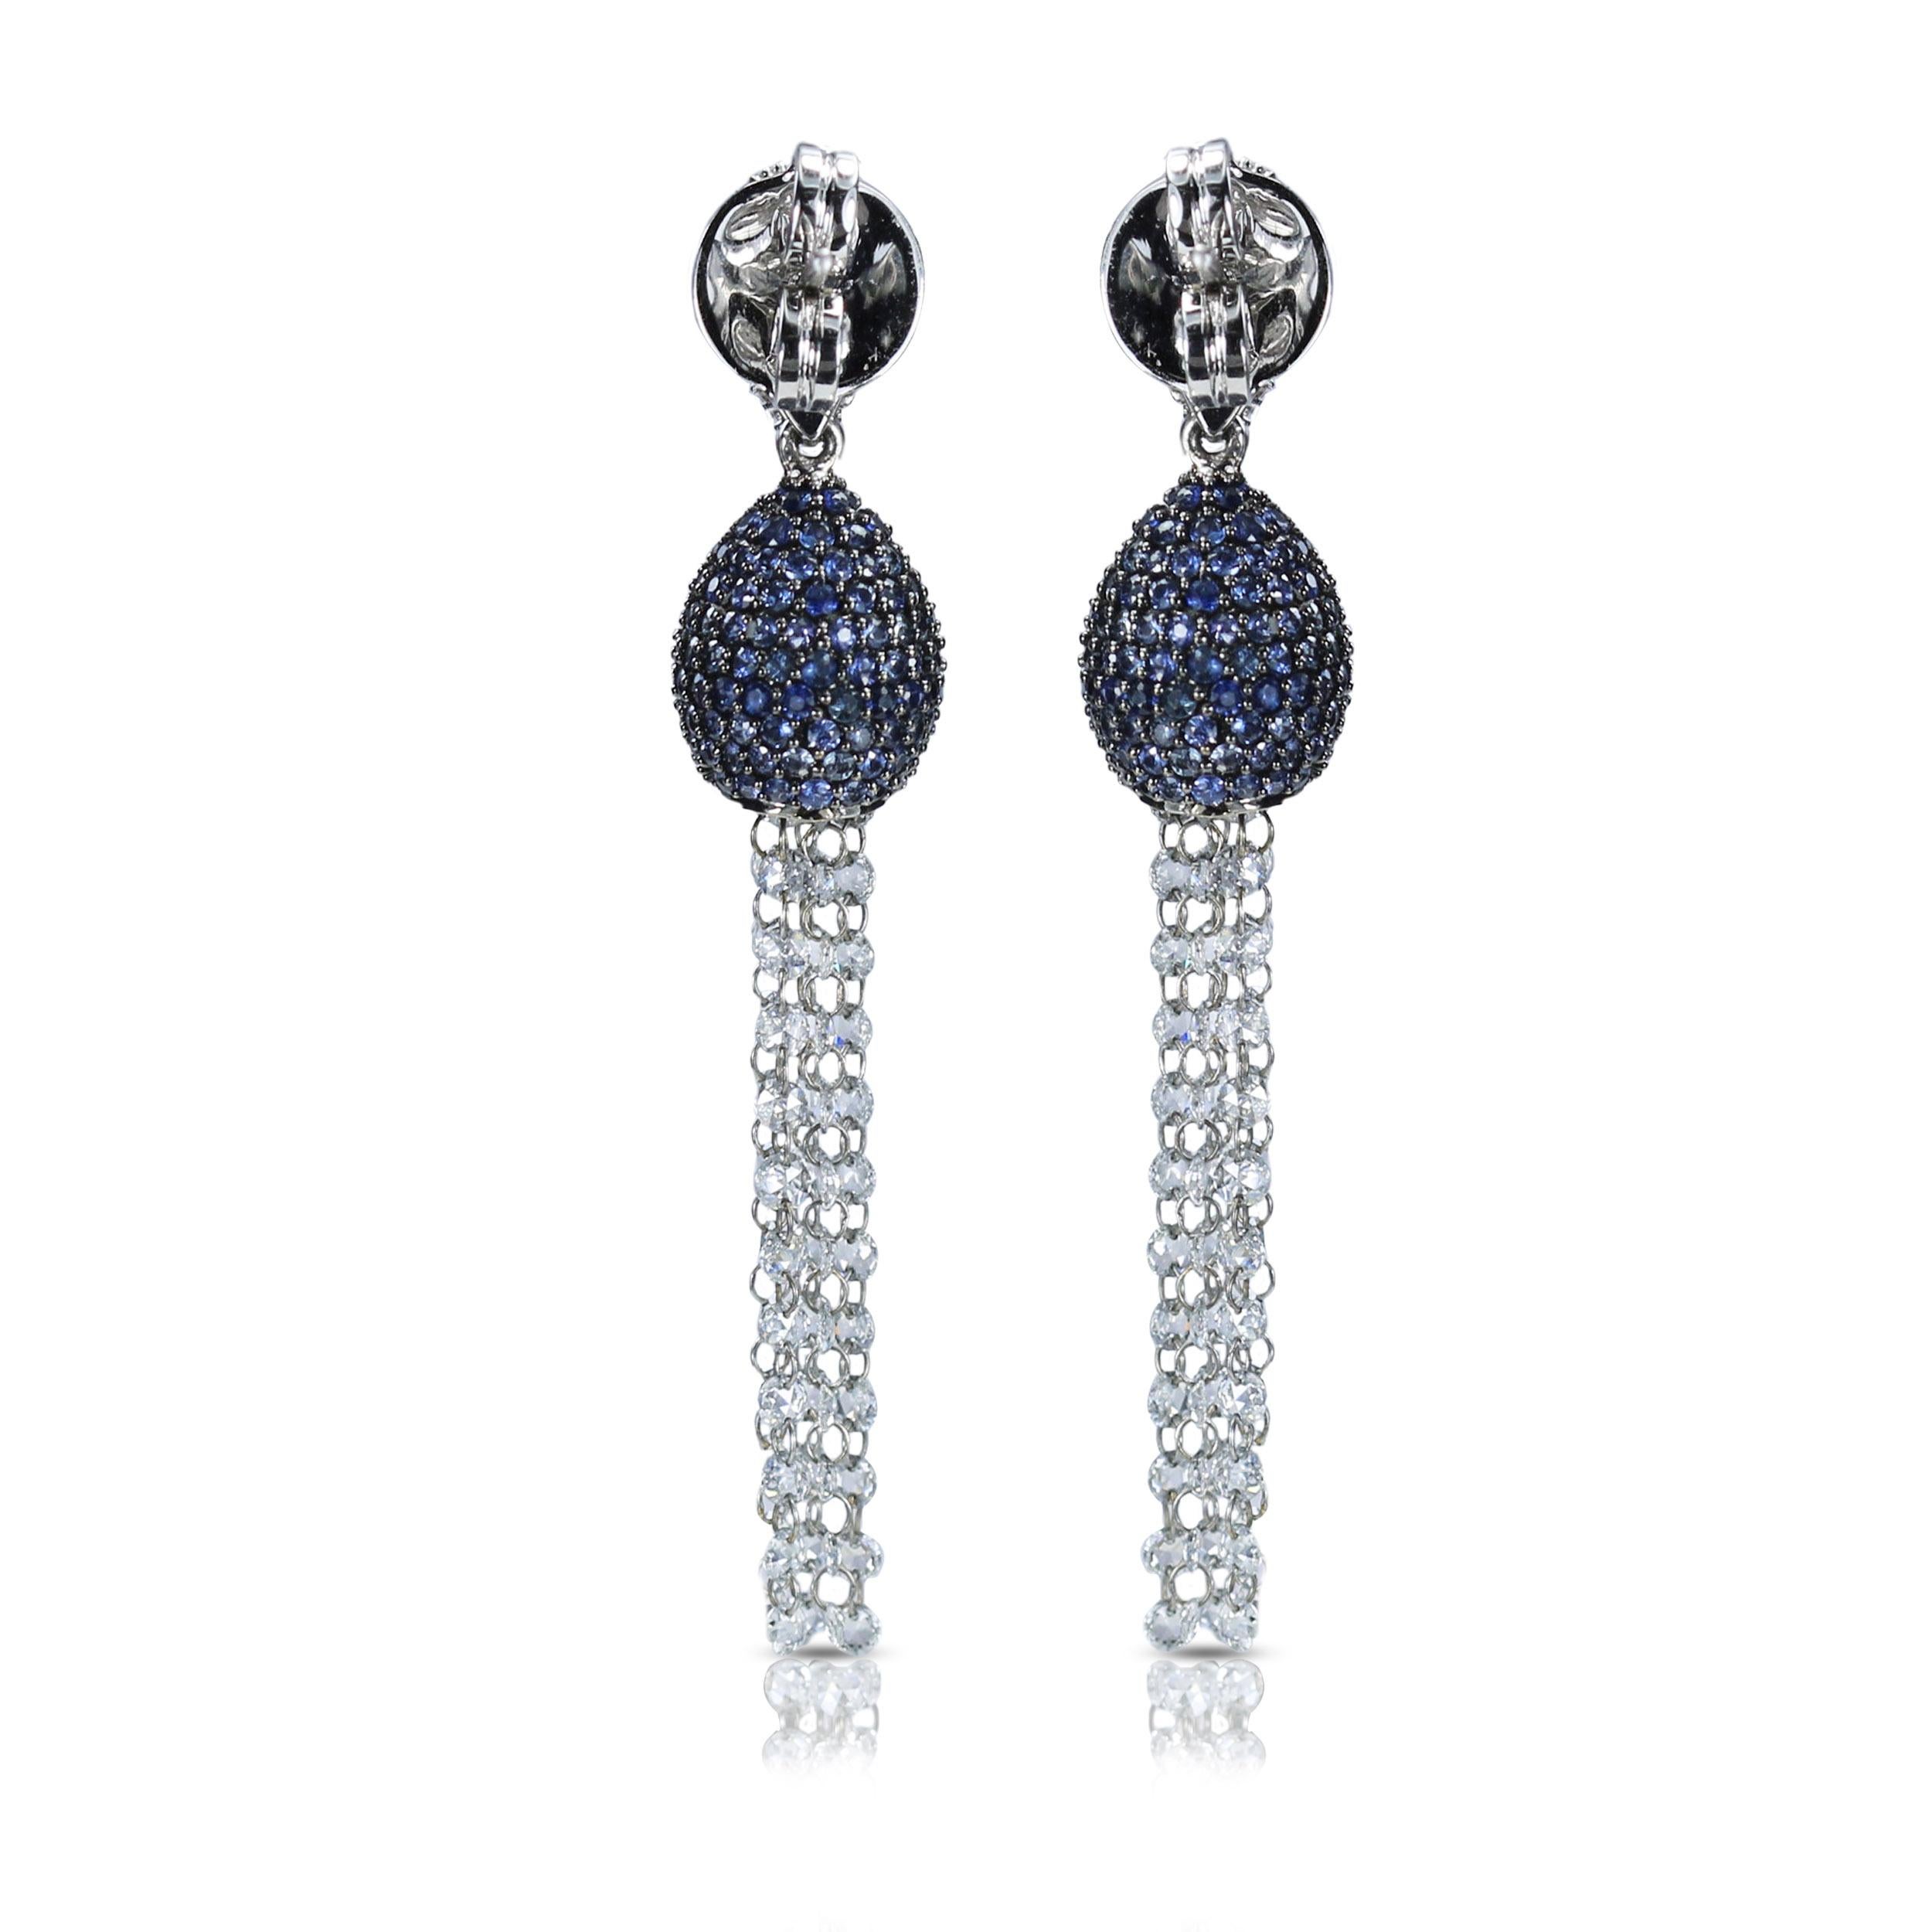 Studio Rêves Blue Sapphire and Rose Cut Diamond Dangling Earrings in 18K Gold In New Condition For Sale In Mumbai, Maharashtra